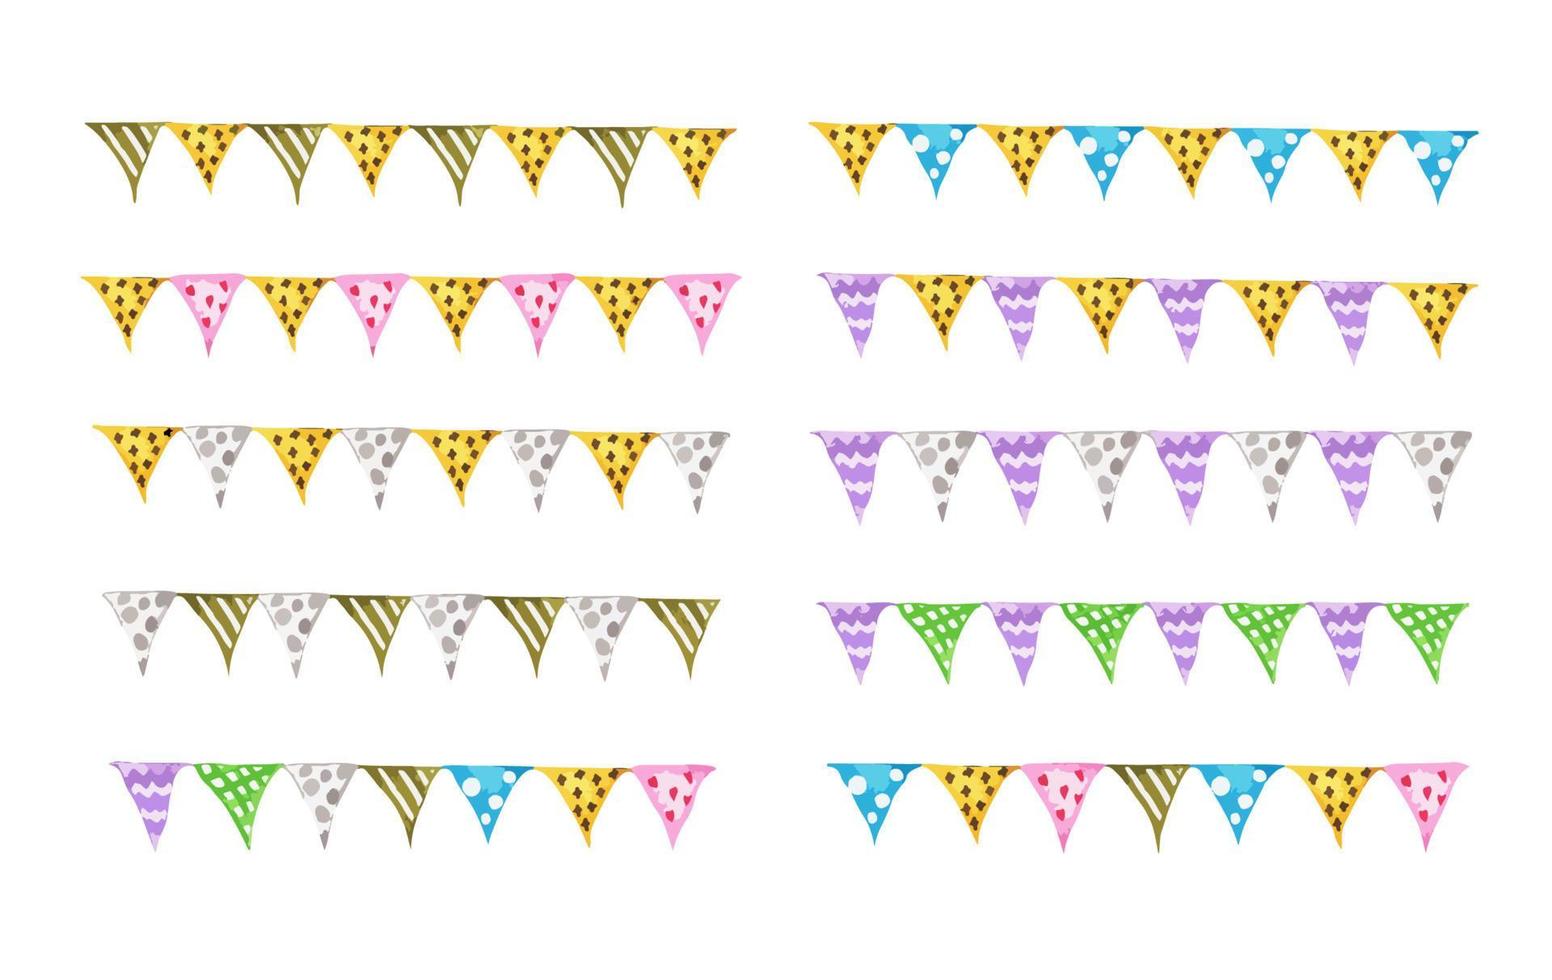 Festive garlands of colored flags. Watercolor illustration. vector